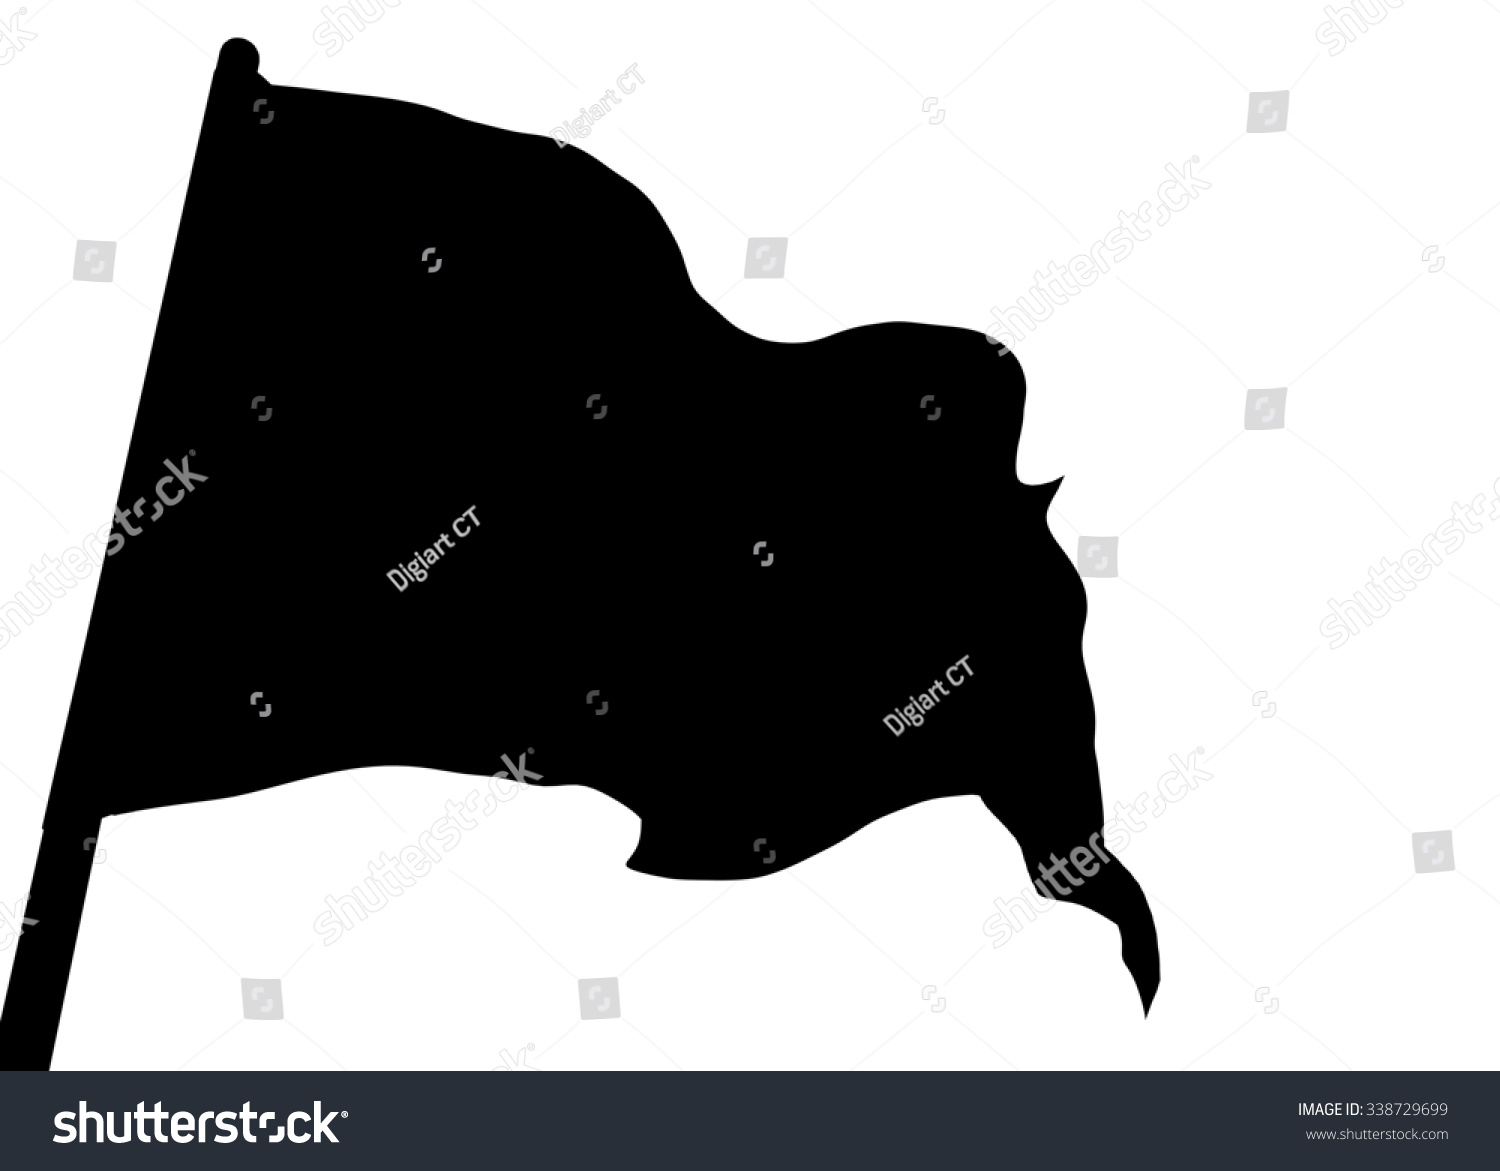 Download Waving Flag Silhouette Selection Mask 3d Stock ...